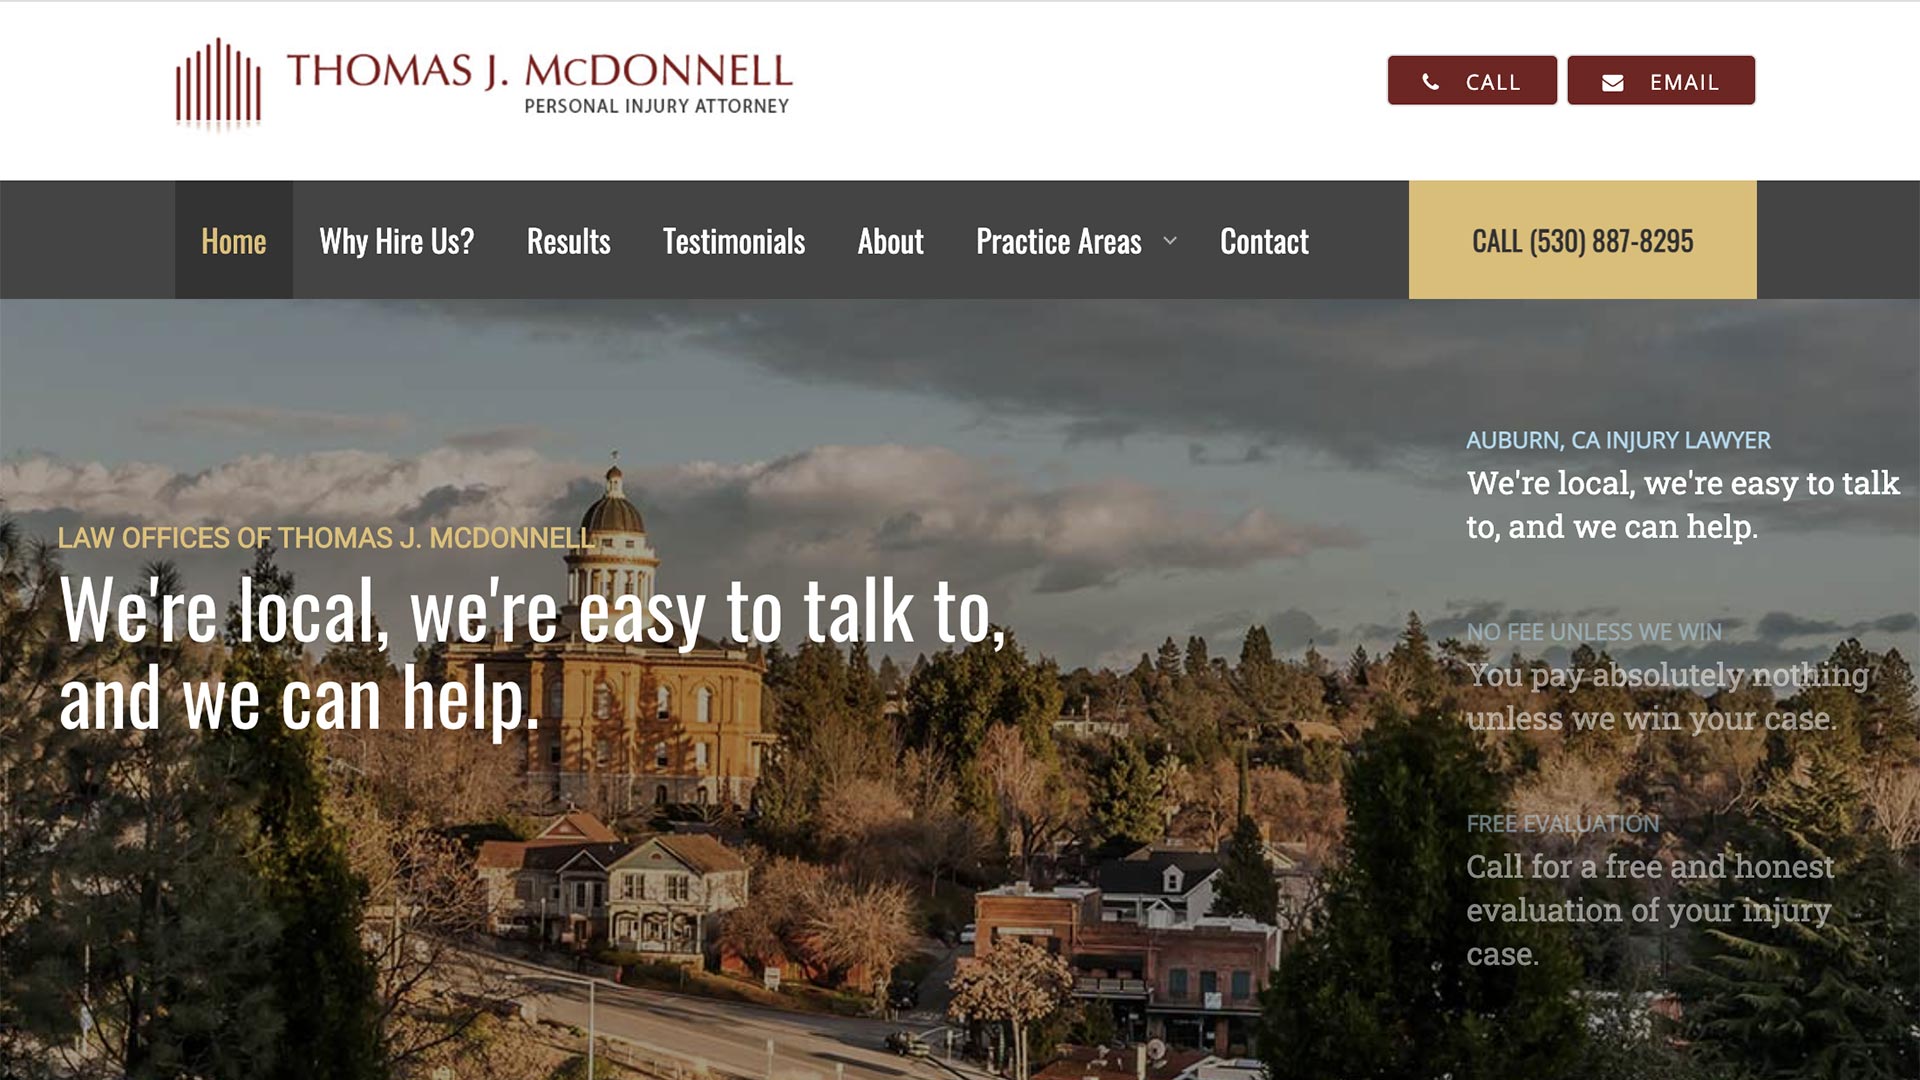 Personal Injury Website Example: Thomas J. McDonnell